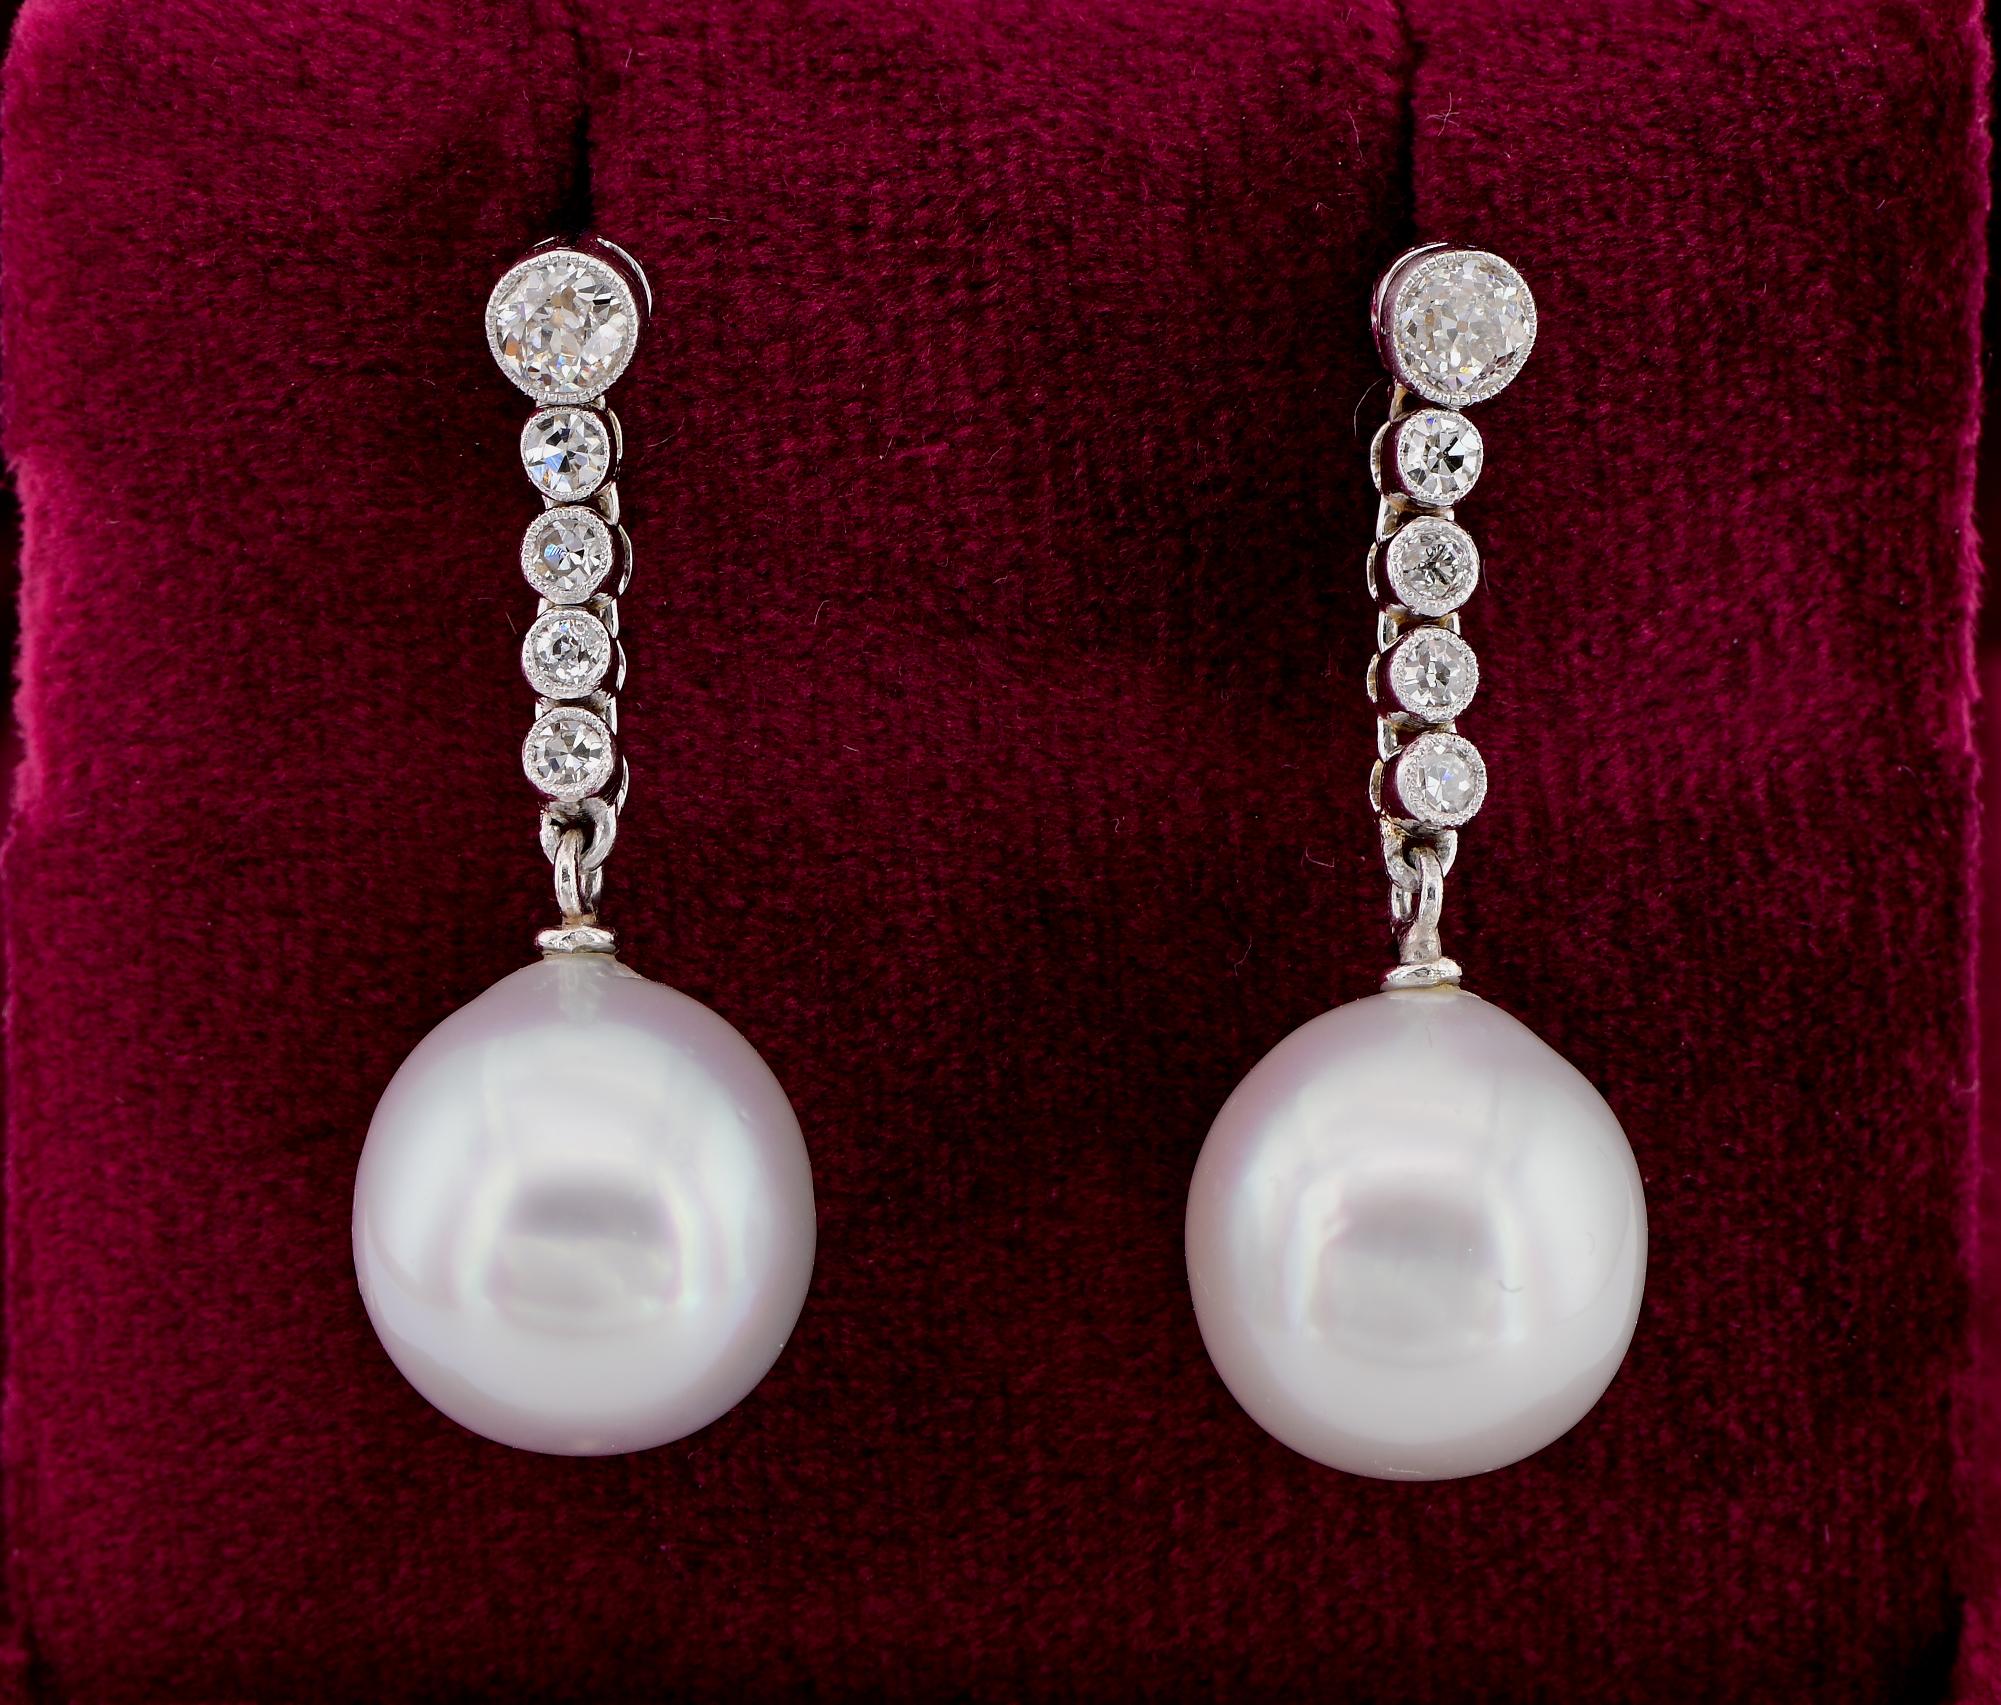 Art Deco Classy Mast Have
An exquisite pair of Art Deco period Diamond and salt water cultured Pearl drop earrings, 1930 ca.
Europe origin, possibly French
Simple yet effective design consisting in a line of Diamonds with suspended Pearls swinging